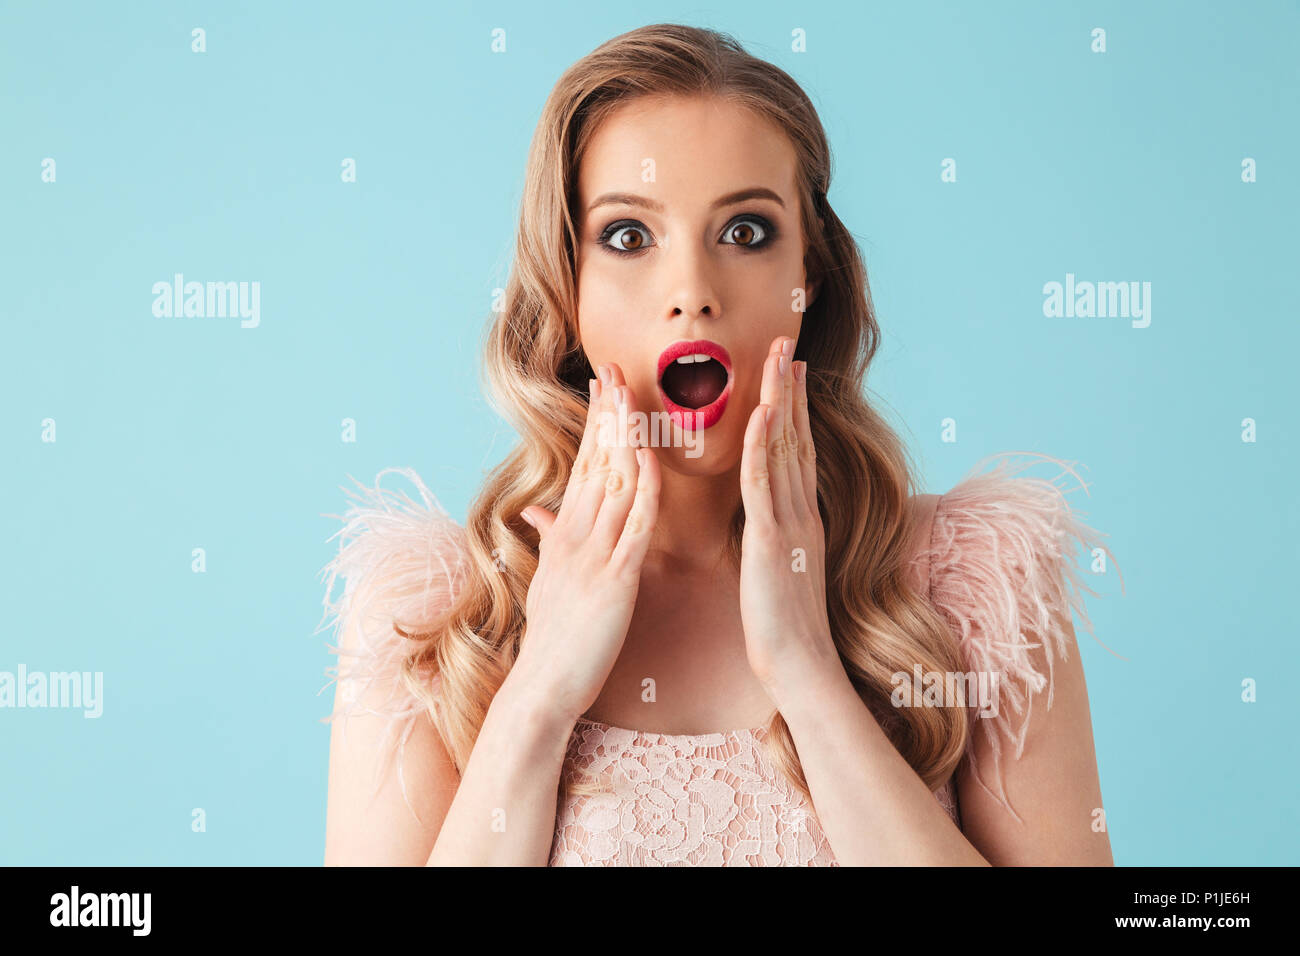 Surprised blonde woman in dress touching her cheeks and looking at the camera over turquoise background Stock Photo